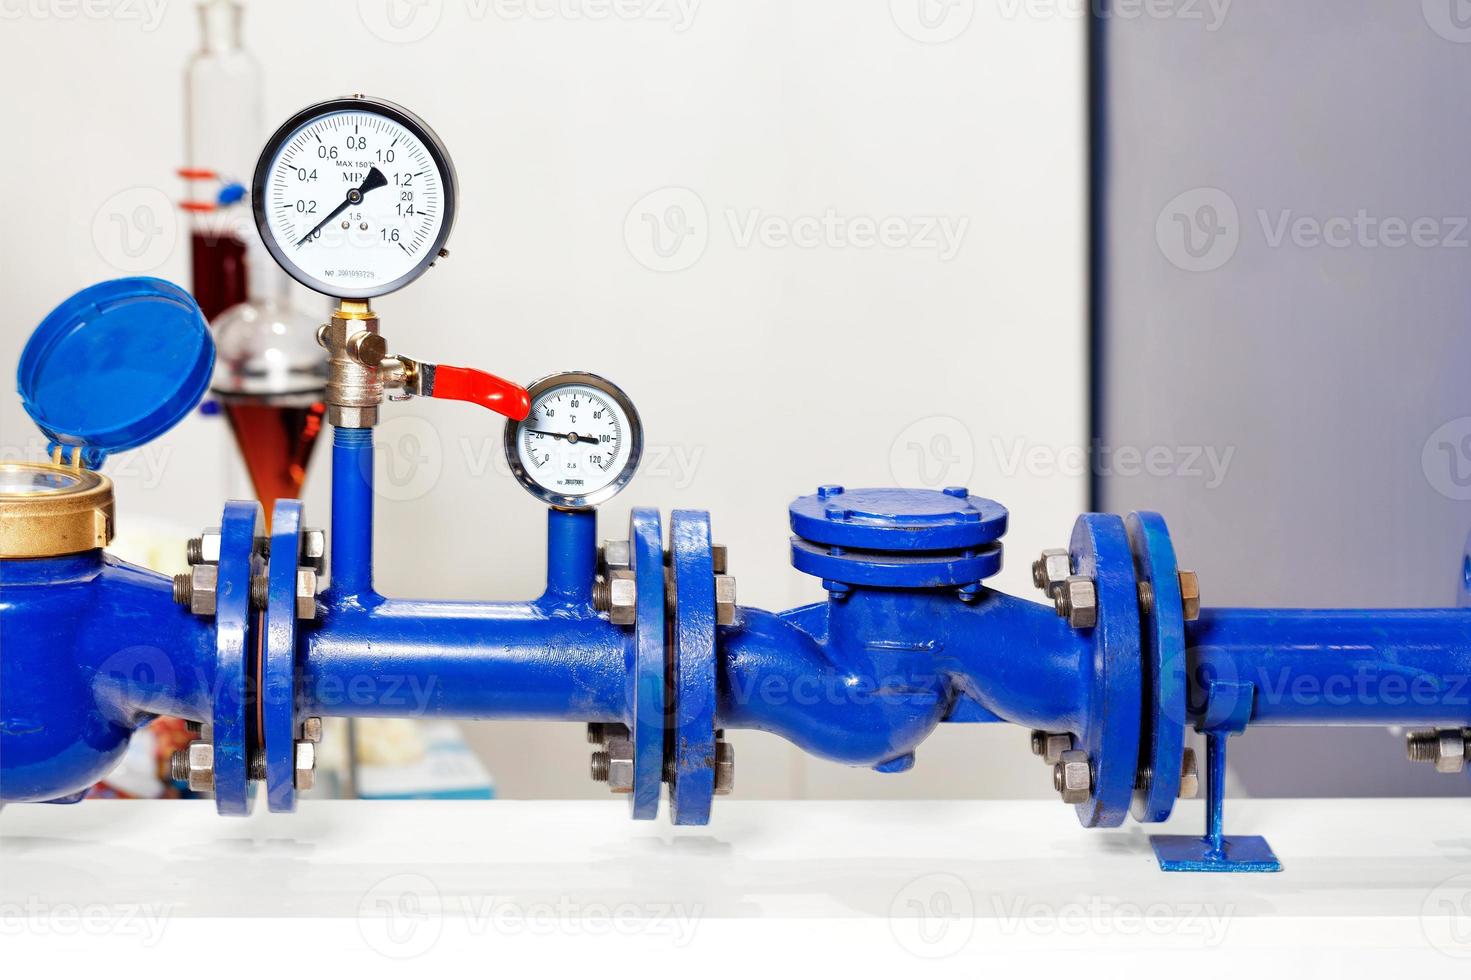 Water metering and pressure system using manometers, close-up. photo